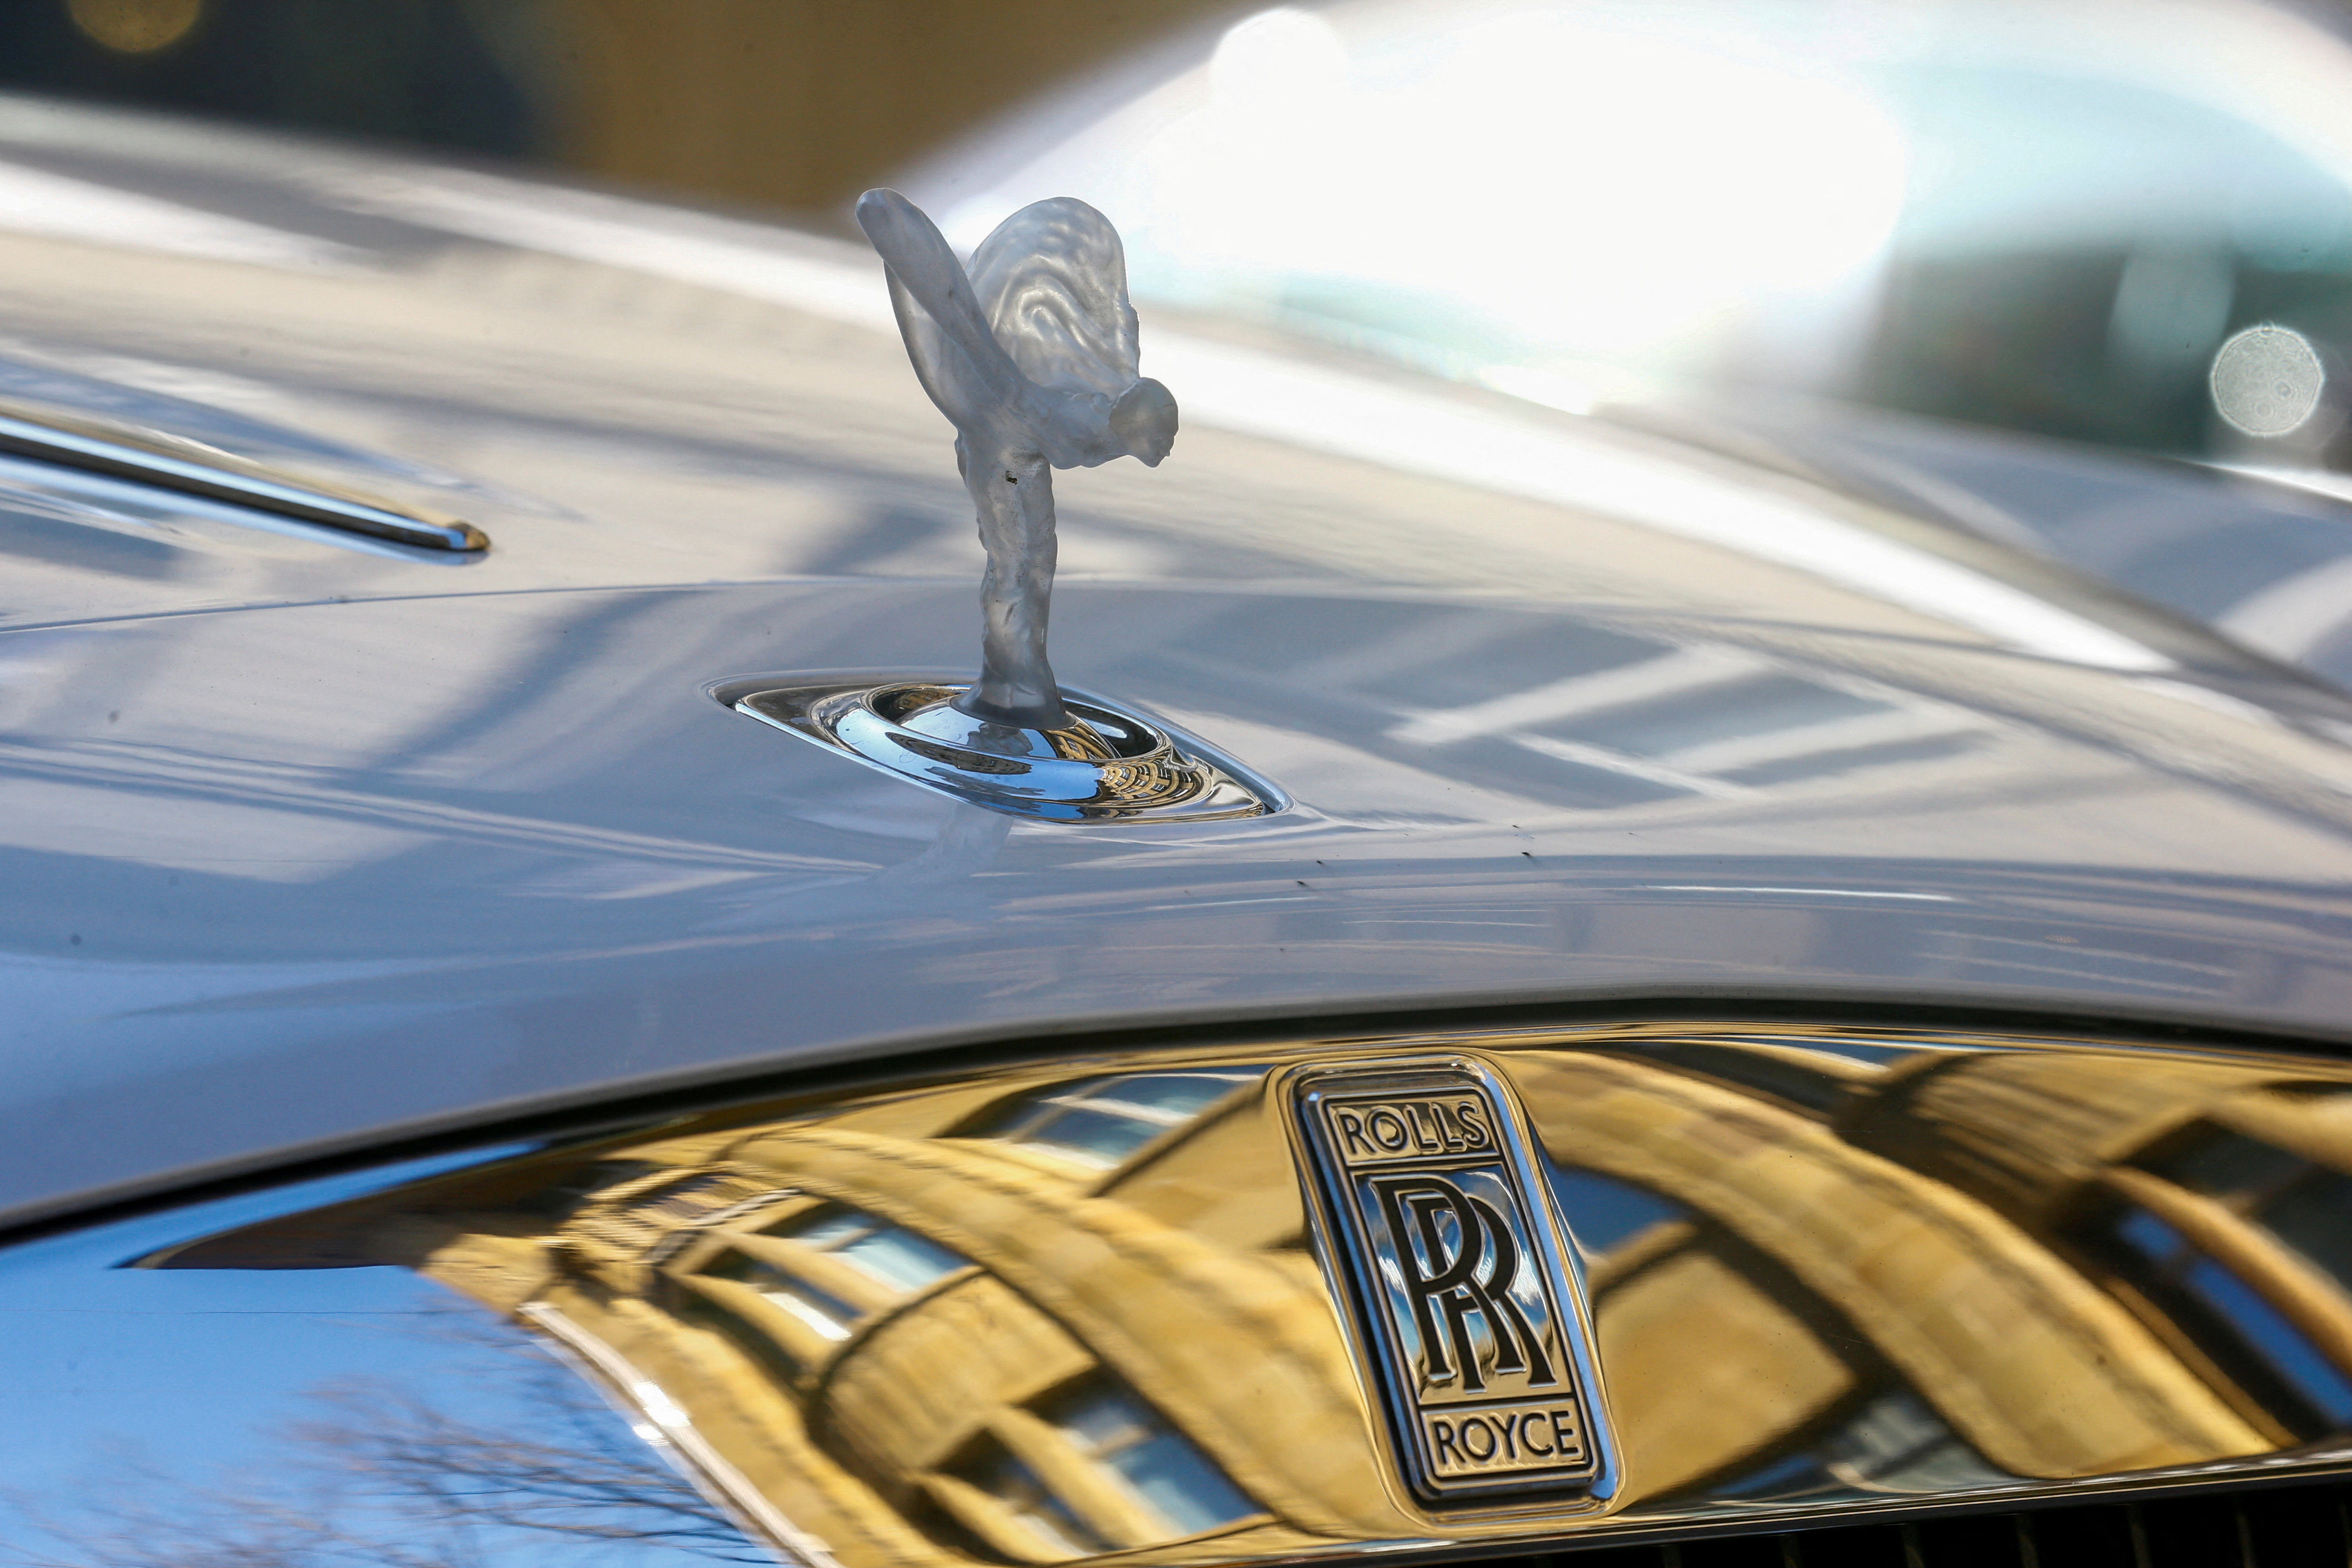 The mascot, the so-called 'Spirit of Ecstasy' or 'Emily', and the company logo are seen on the bonnet of a Rolls-Royce car in Zurich, Switzerland on March 30, 2021. (Reuters)